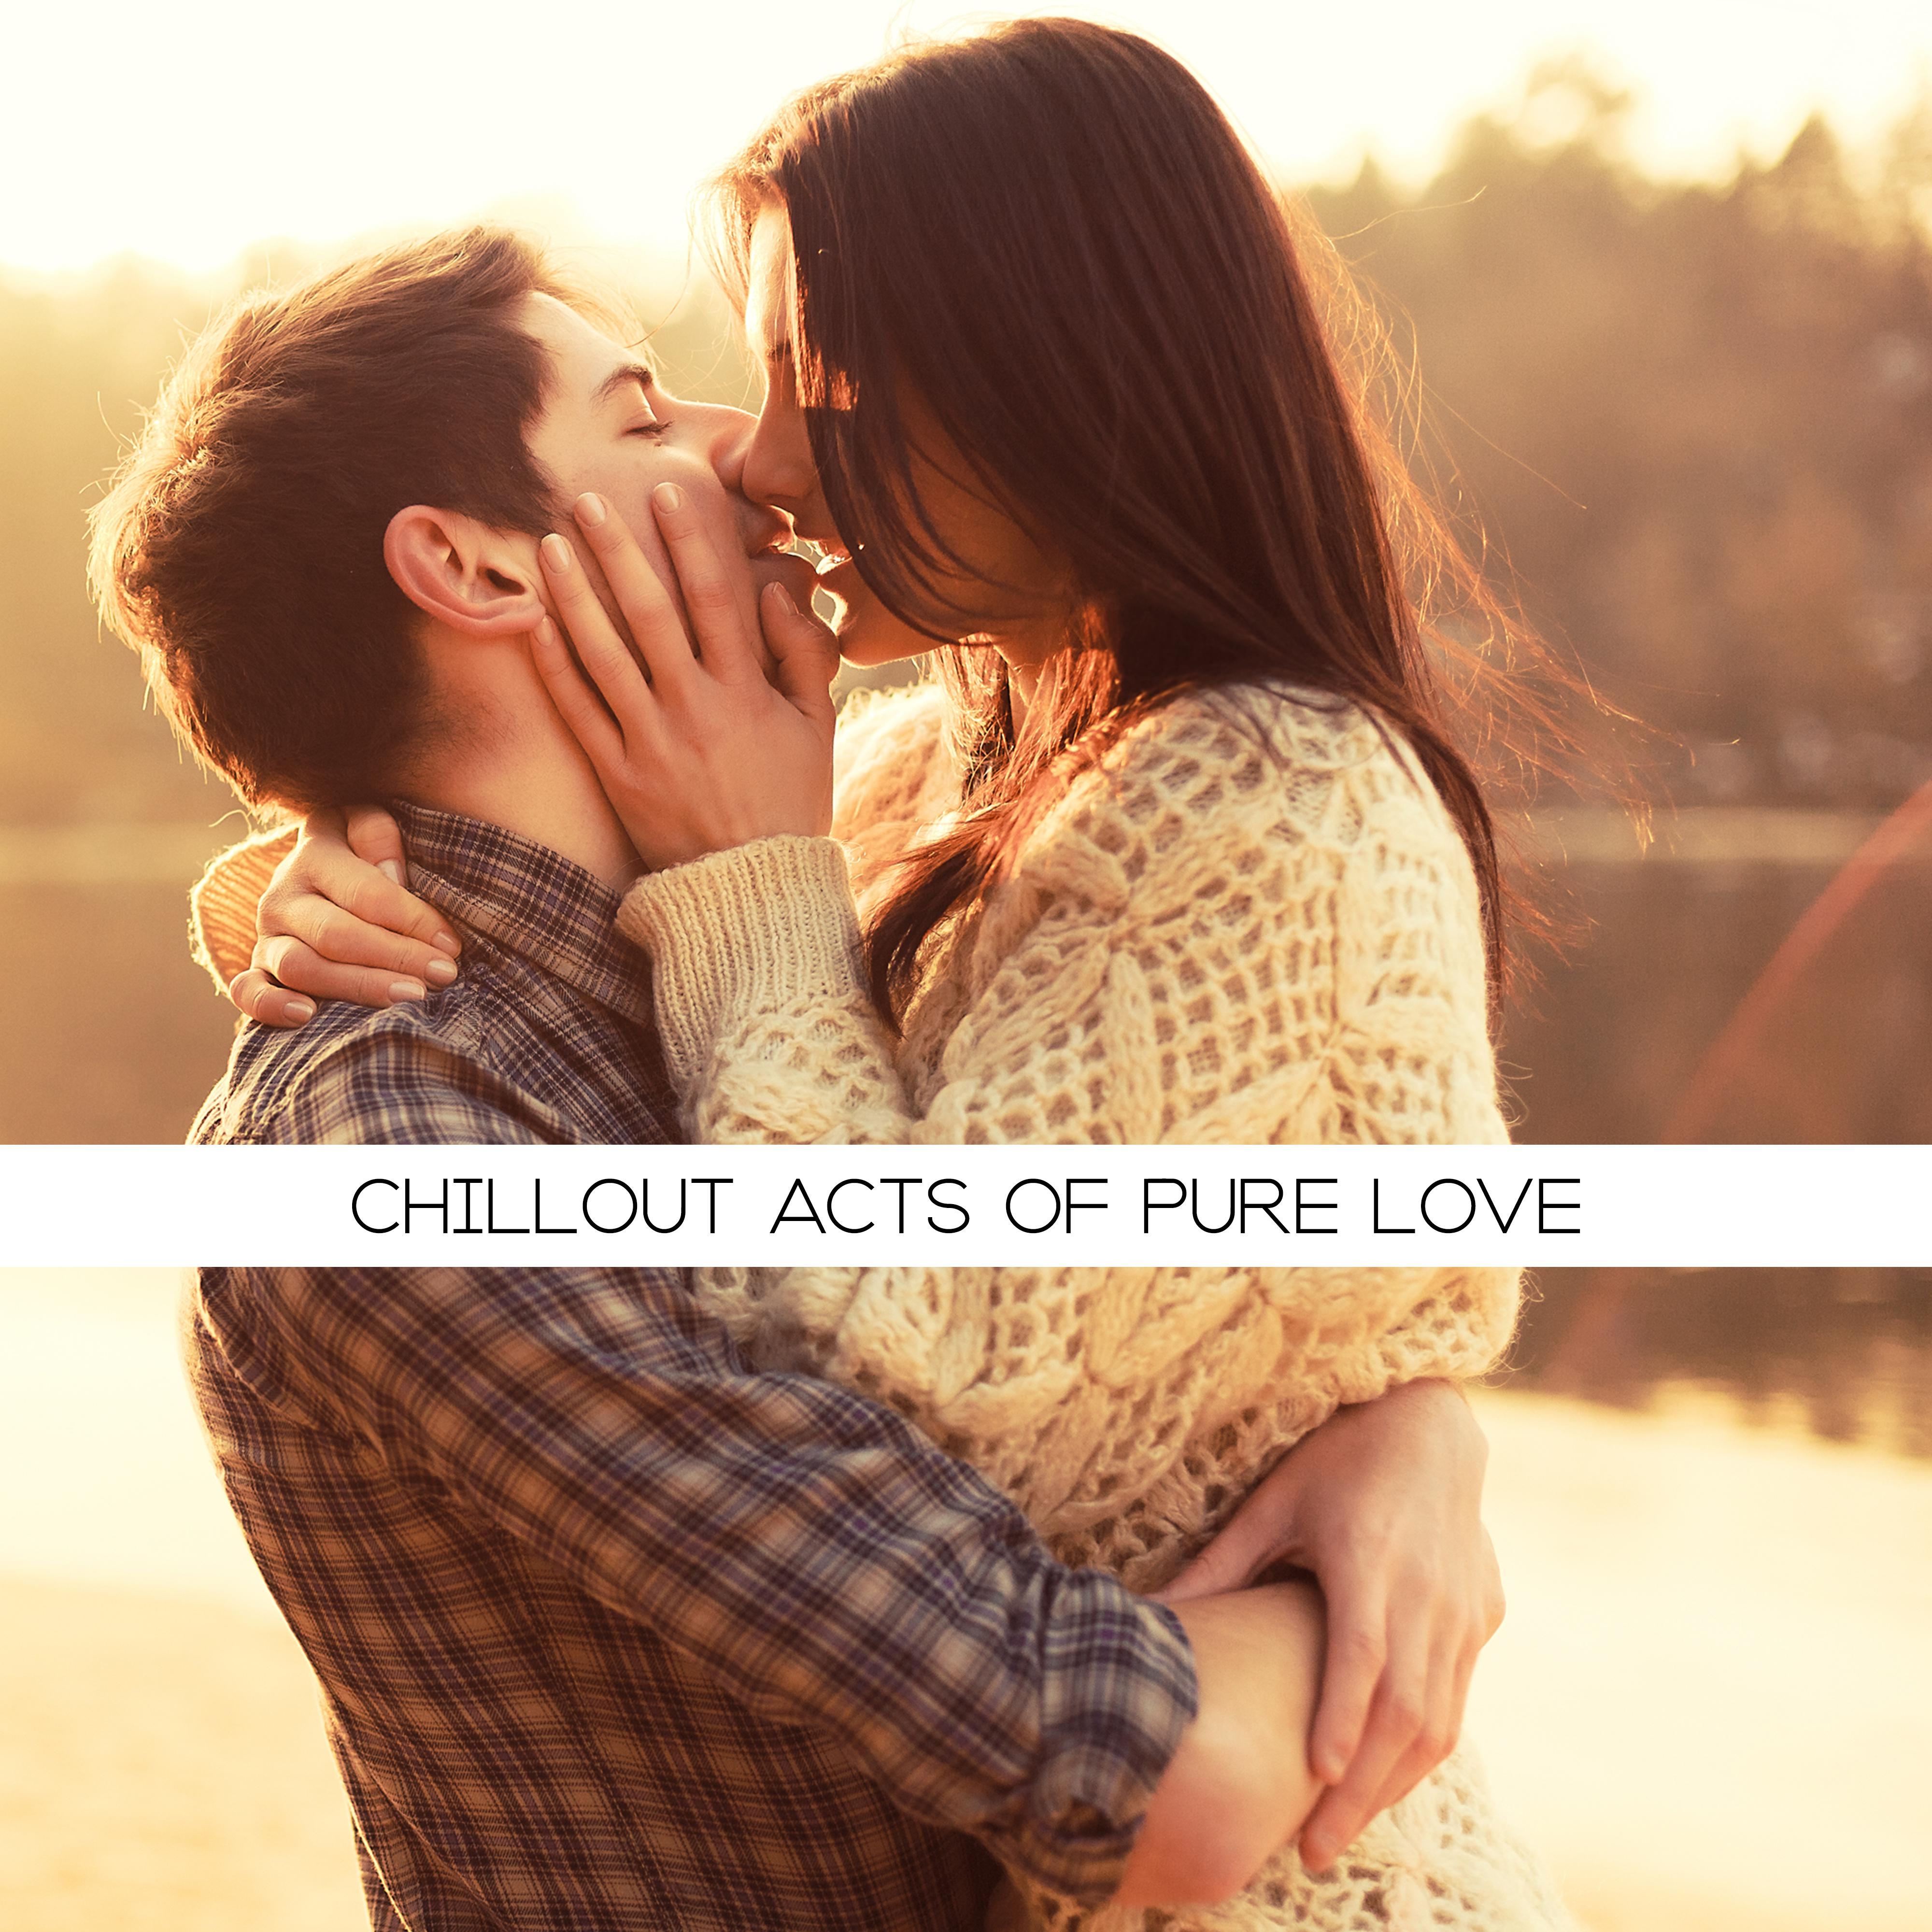 Chillout Acts of Pure Love: 2019 ****** Chill Out Music, Great ****** Pleasures, Erotic Massage & Tantric *** Sensual Vibes, Stimulation Beats